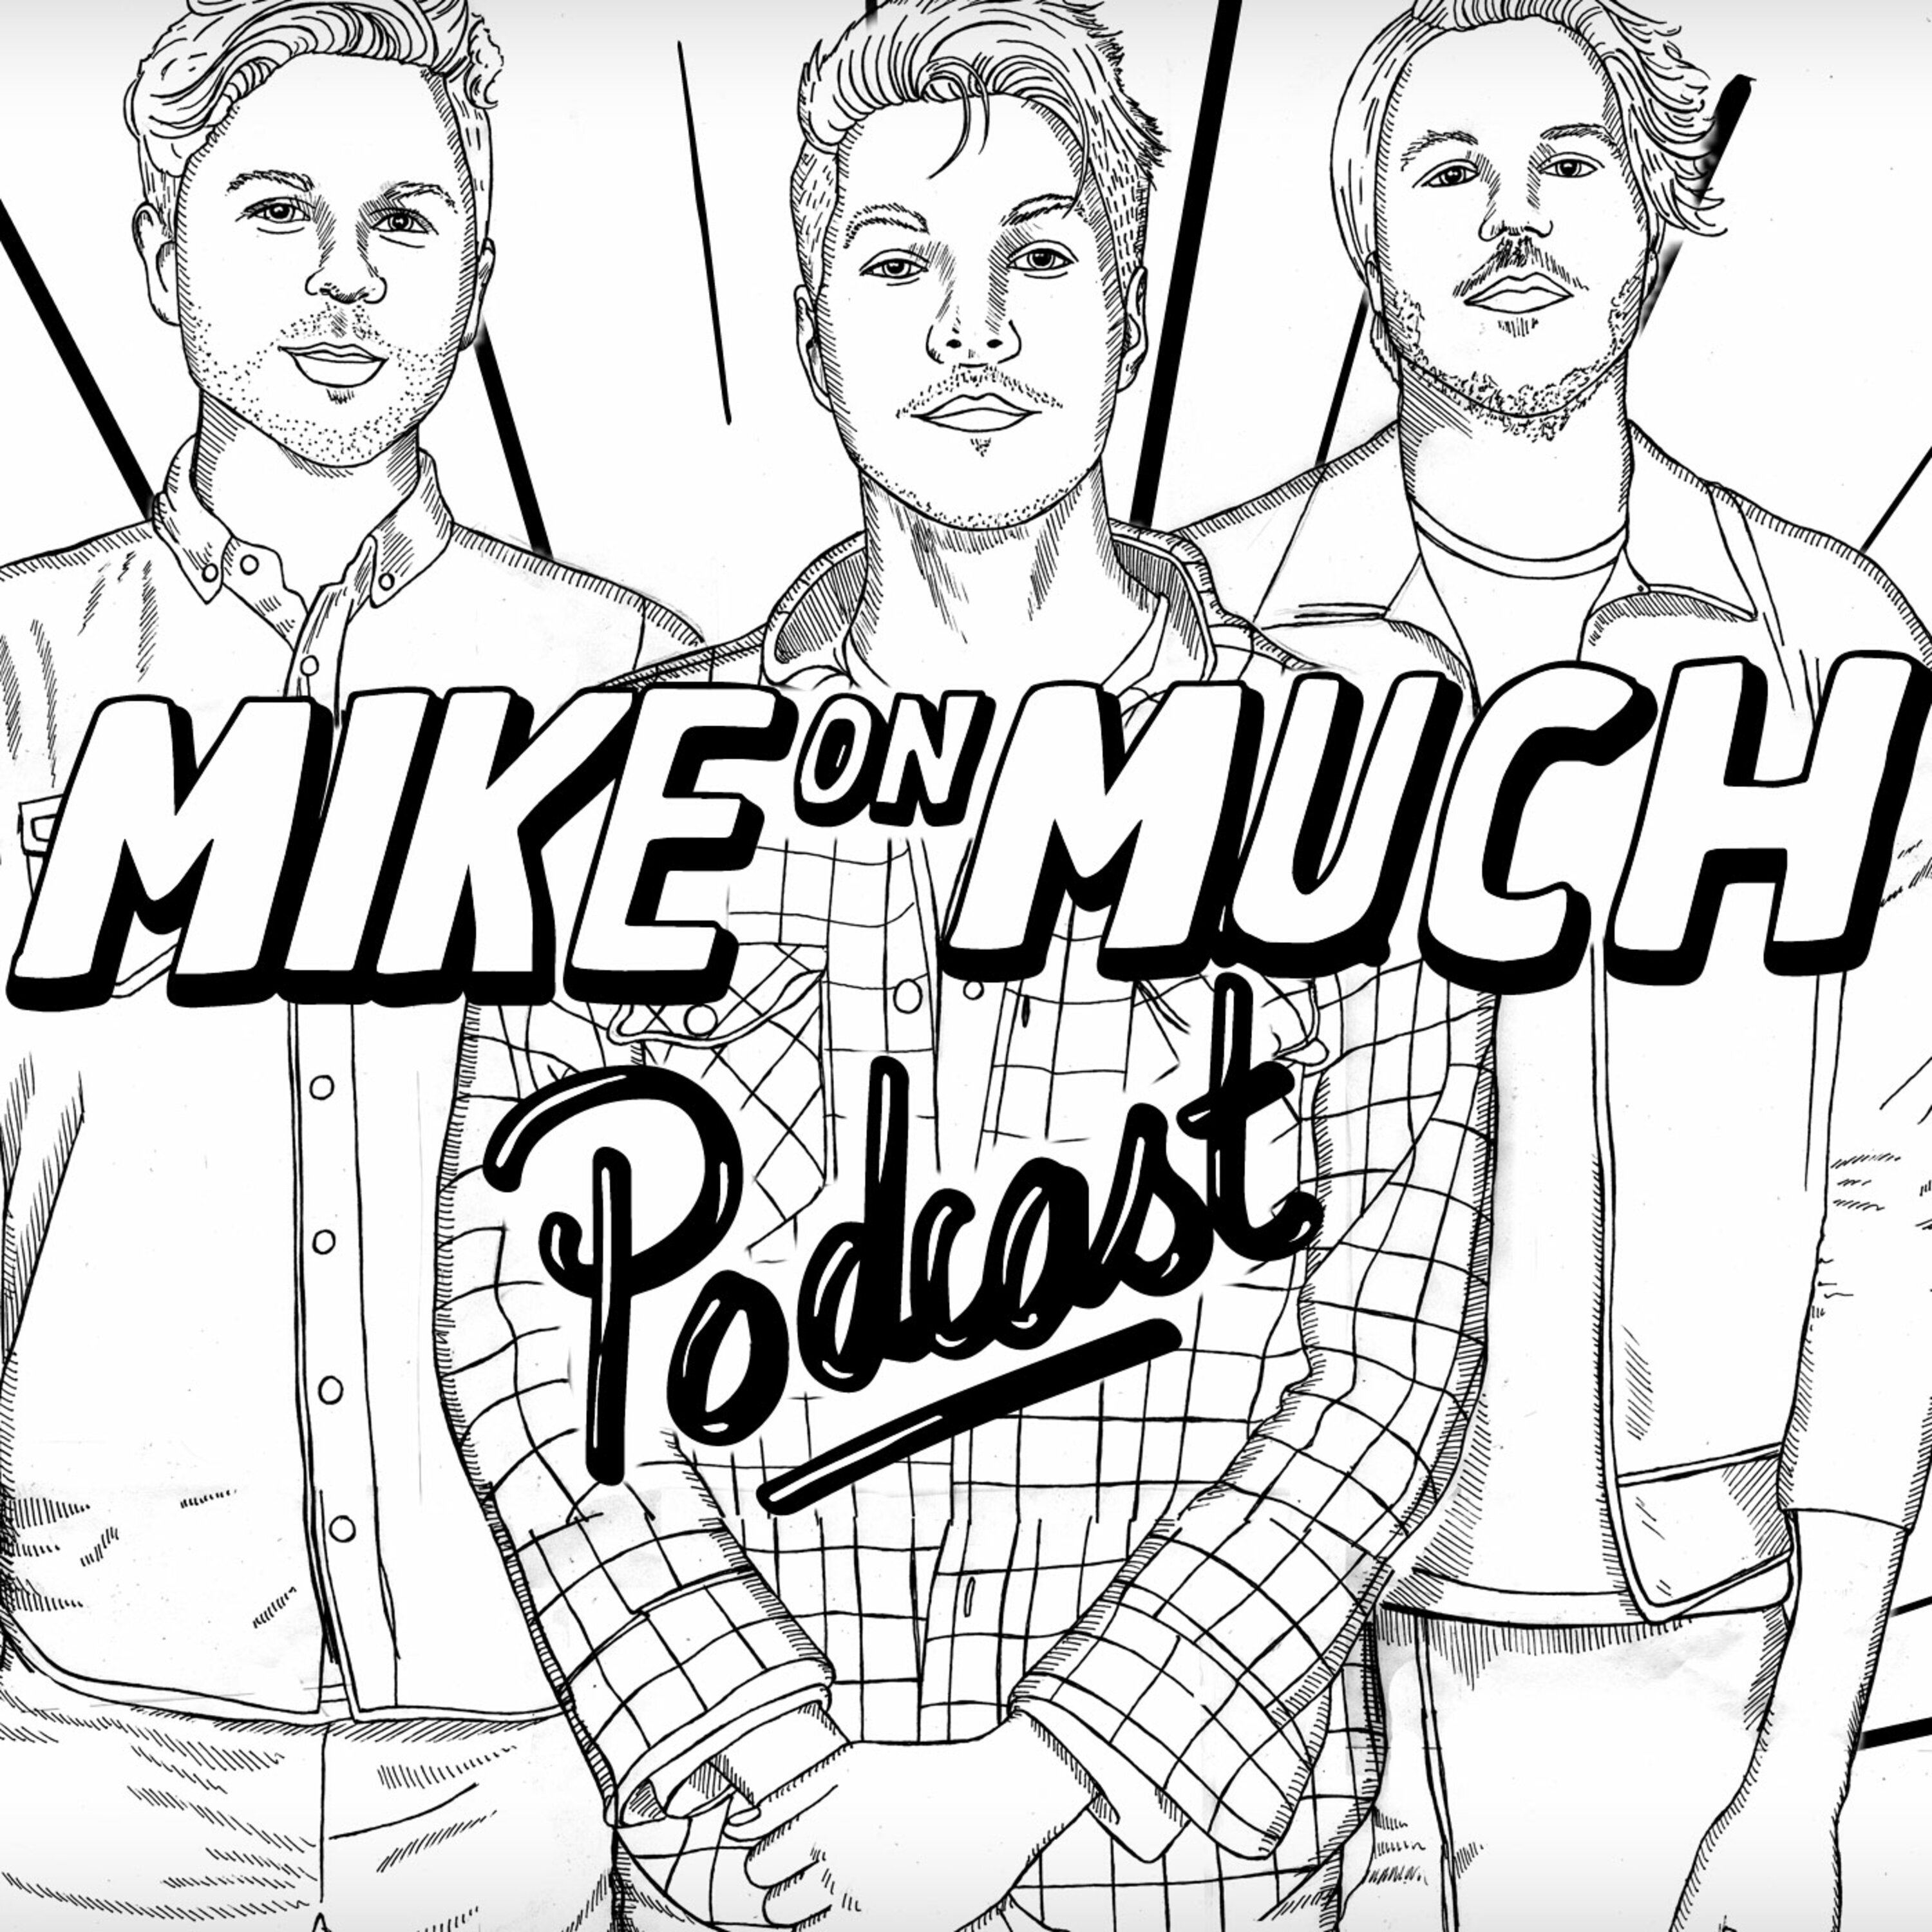 Season 1 Mike On Much: “Phase 3 Boys”